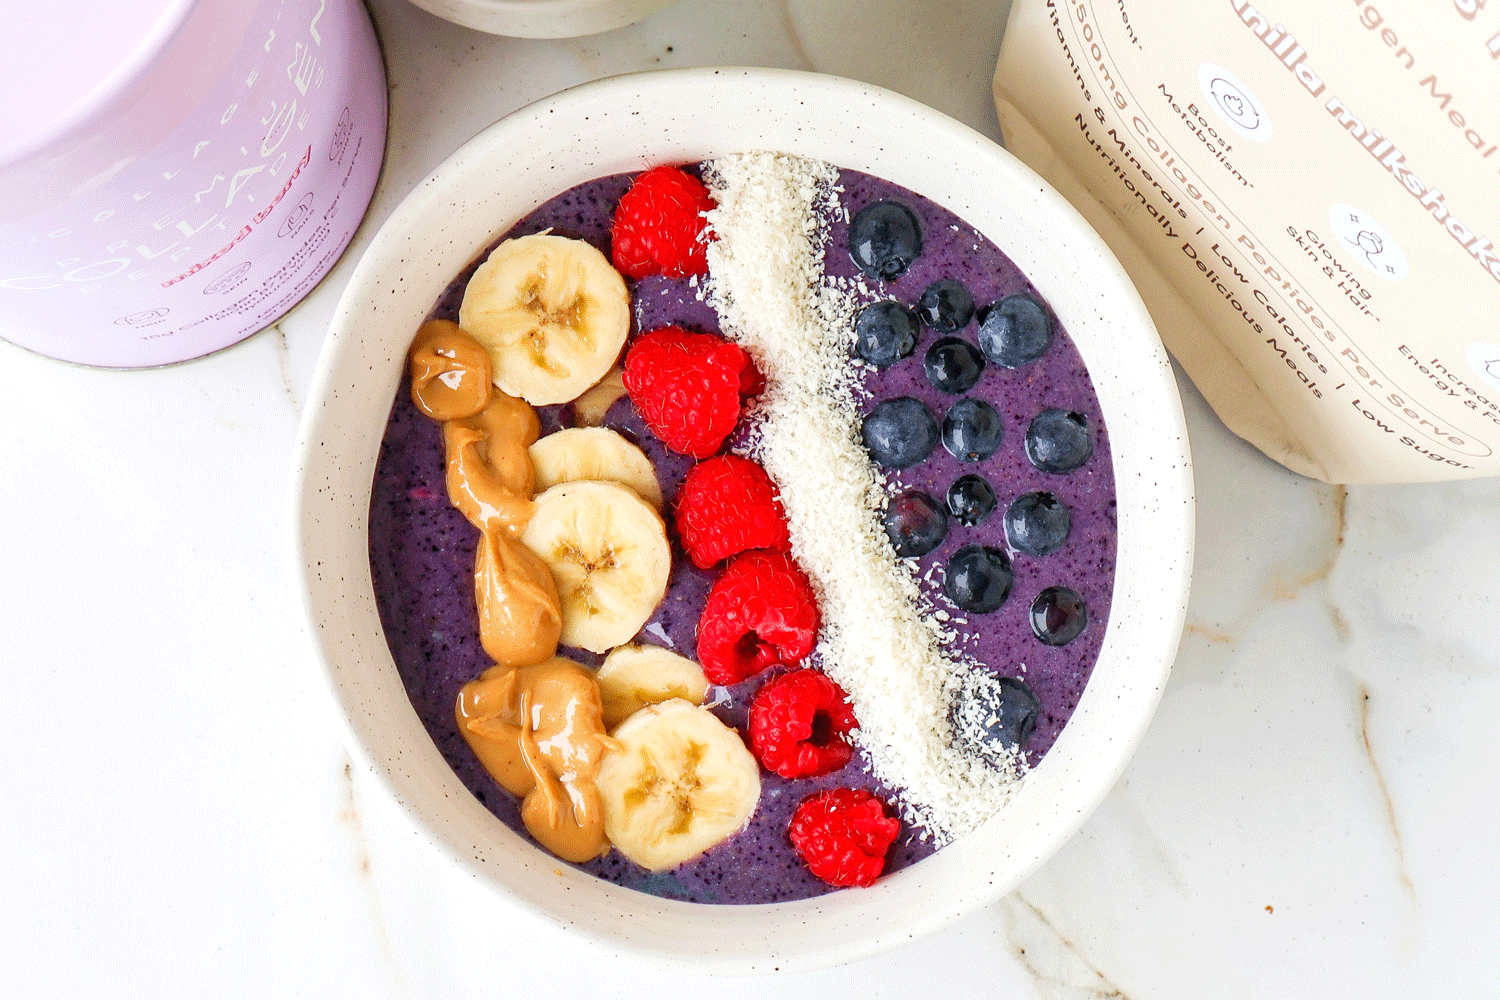 Protein Berry Bowl - The Collagen Co.